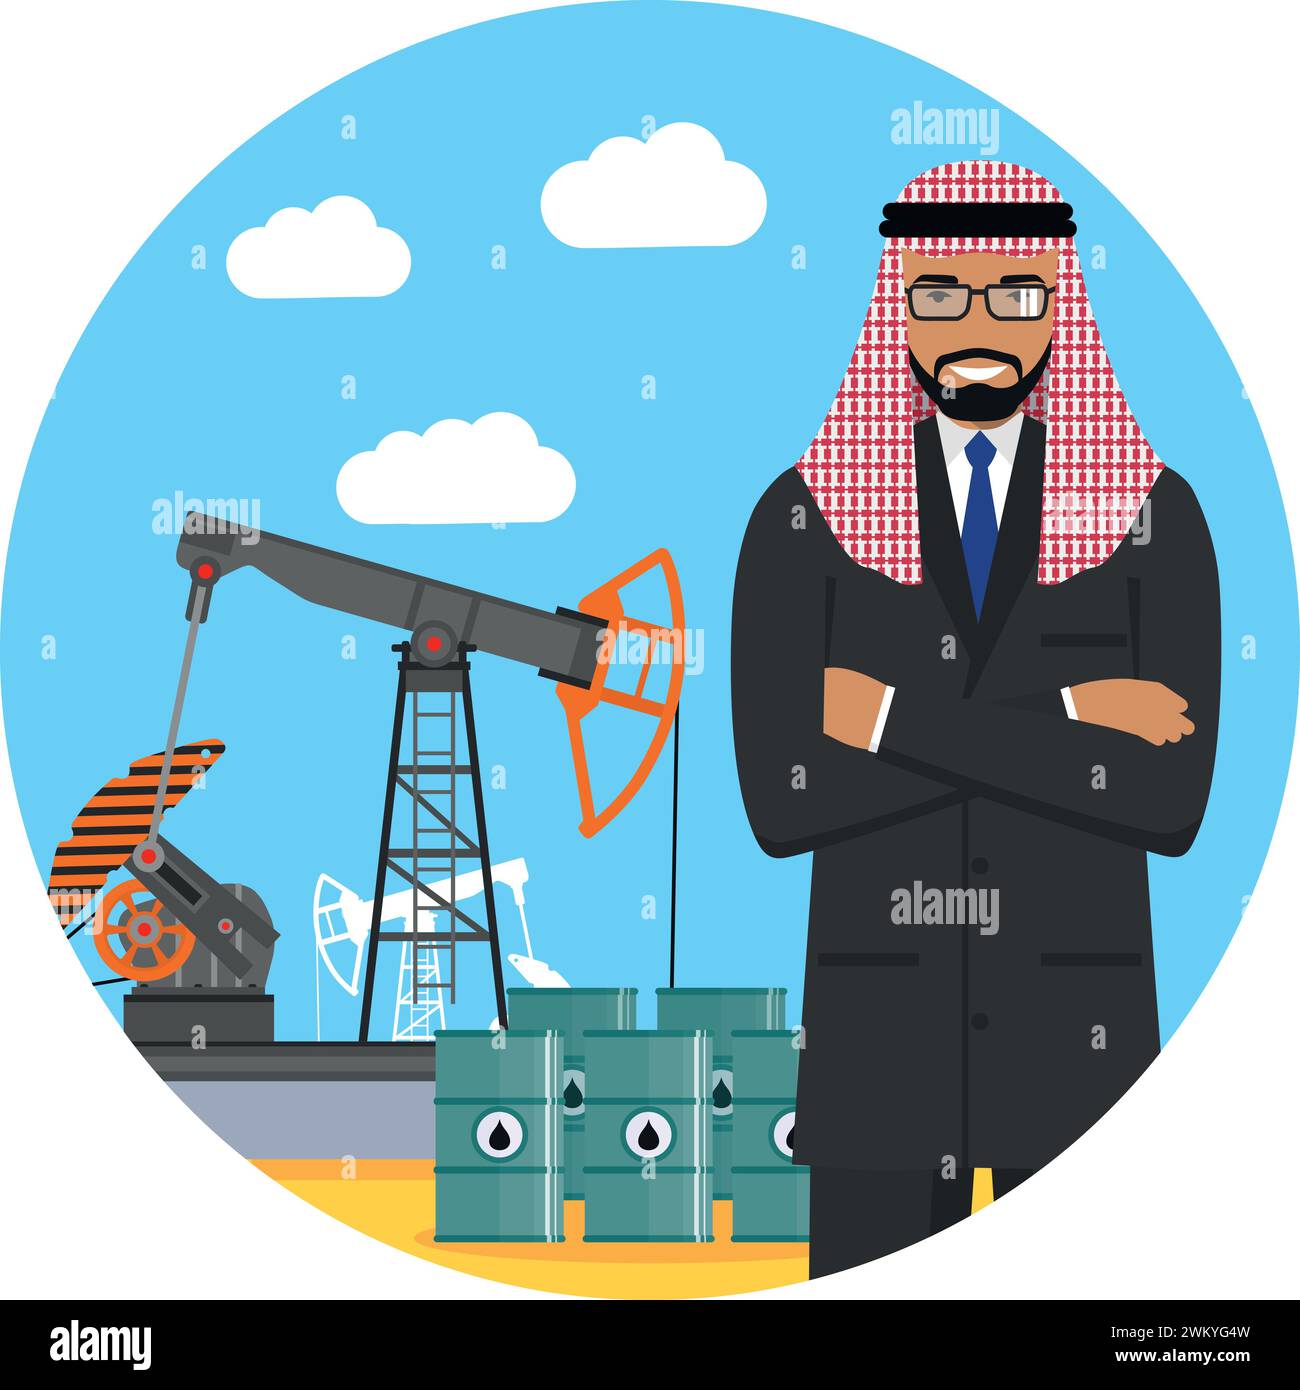 Arab Muslim Businessman with Oil pump and Barrels for Fuel. Vector Illustration Stock Vector